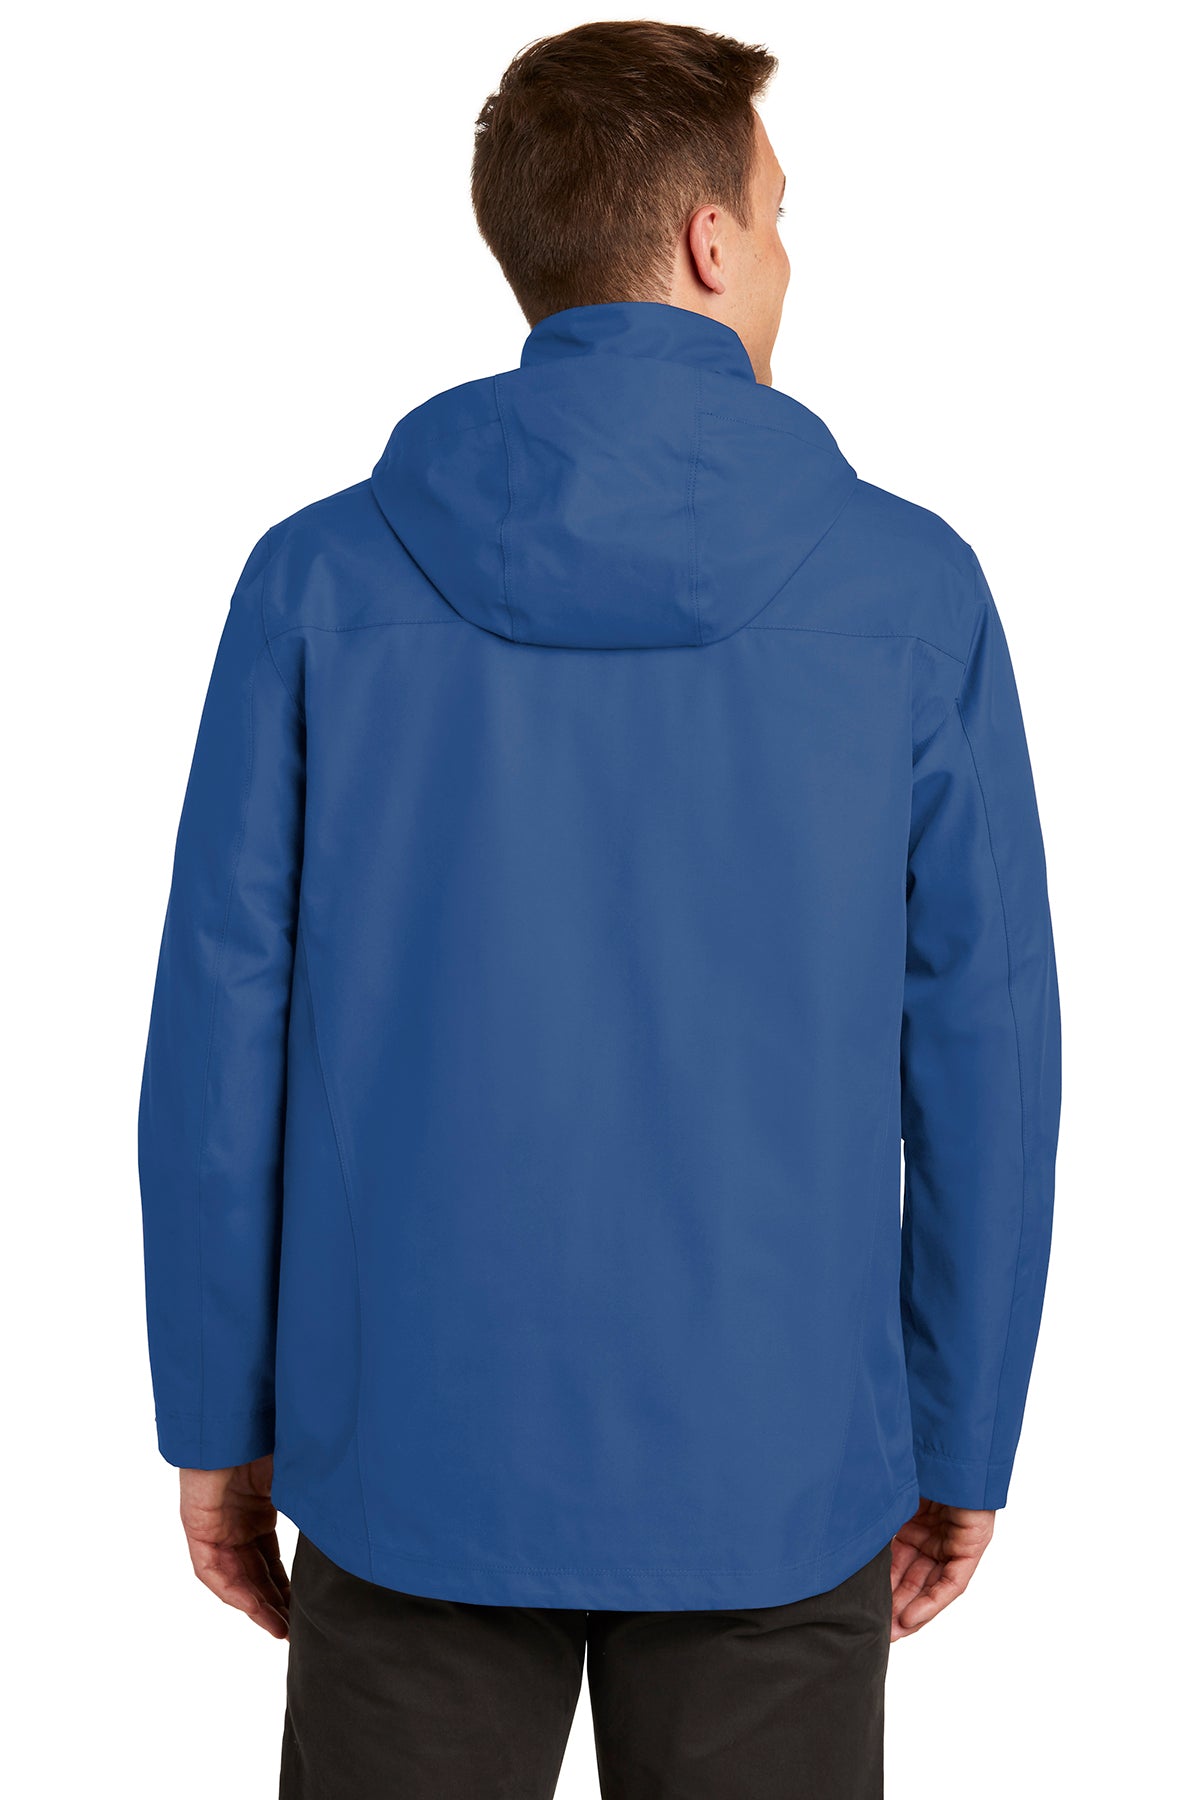 Port Authority Collective Outer Shell Branded Jackets, Night Sky Blue